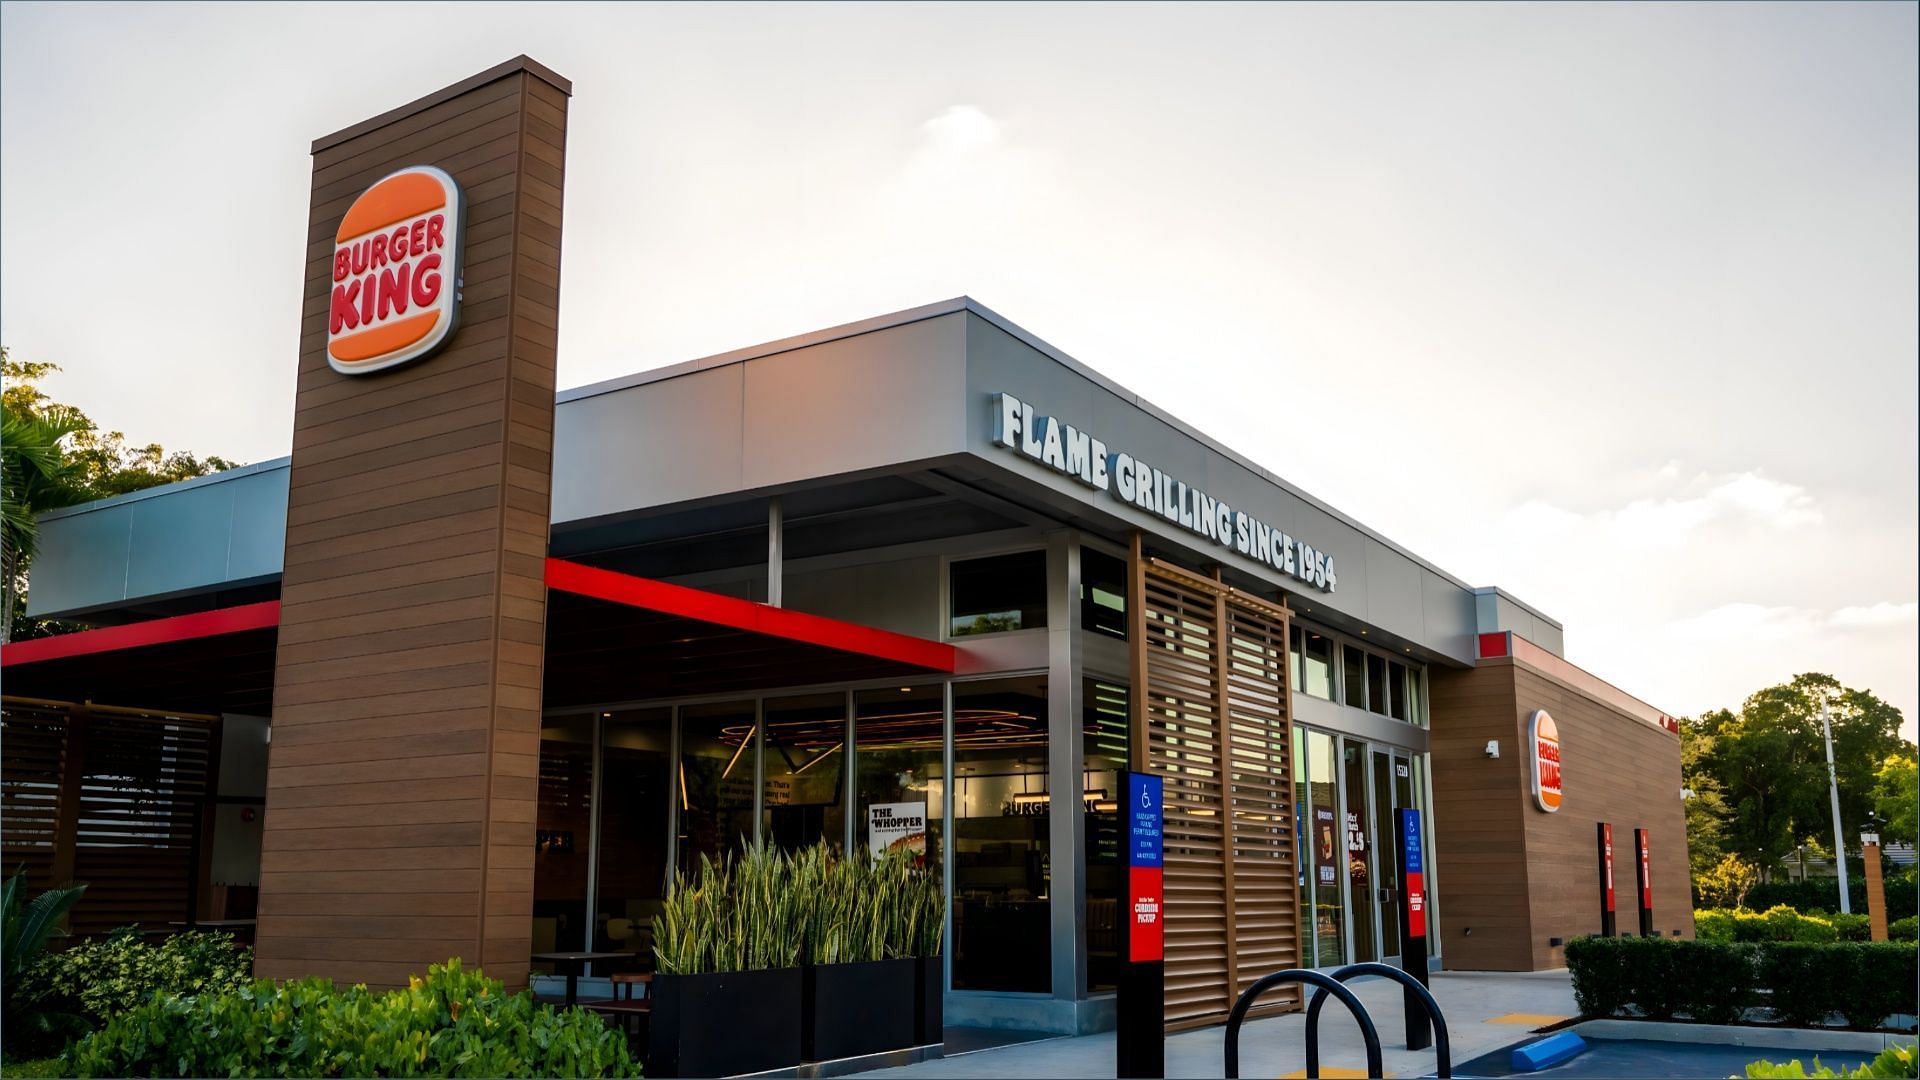 Burger King introduces a month-long of free and discounted food under the &quot;Tis